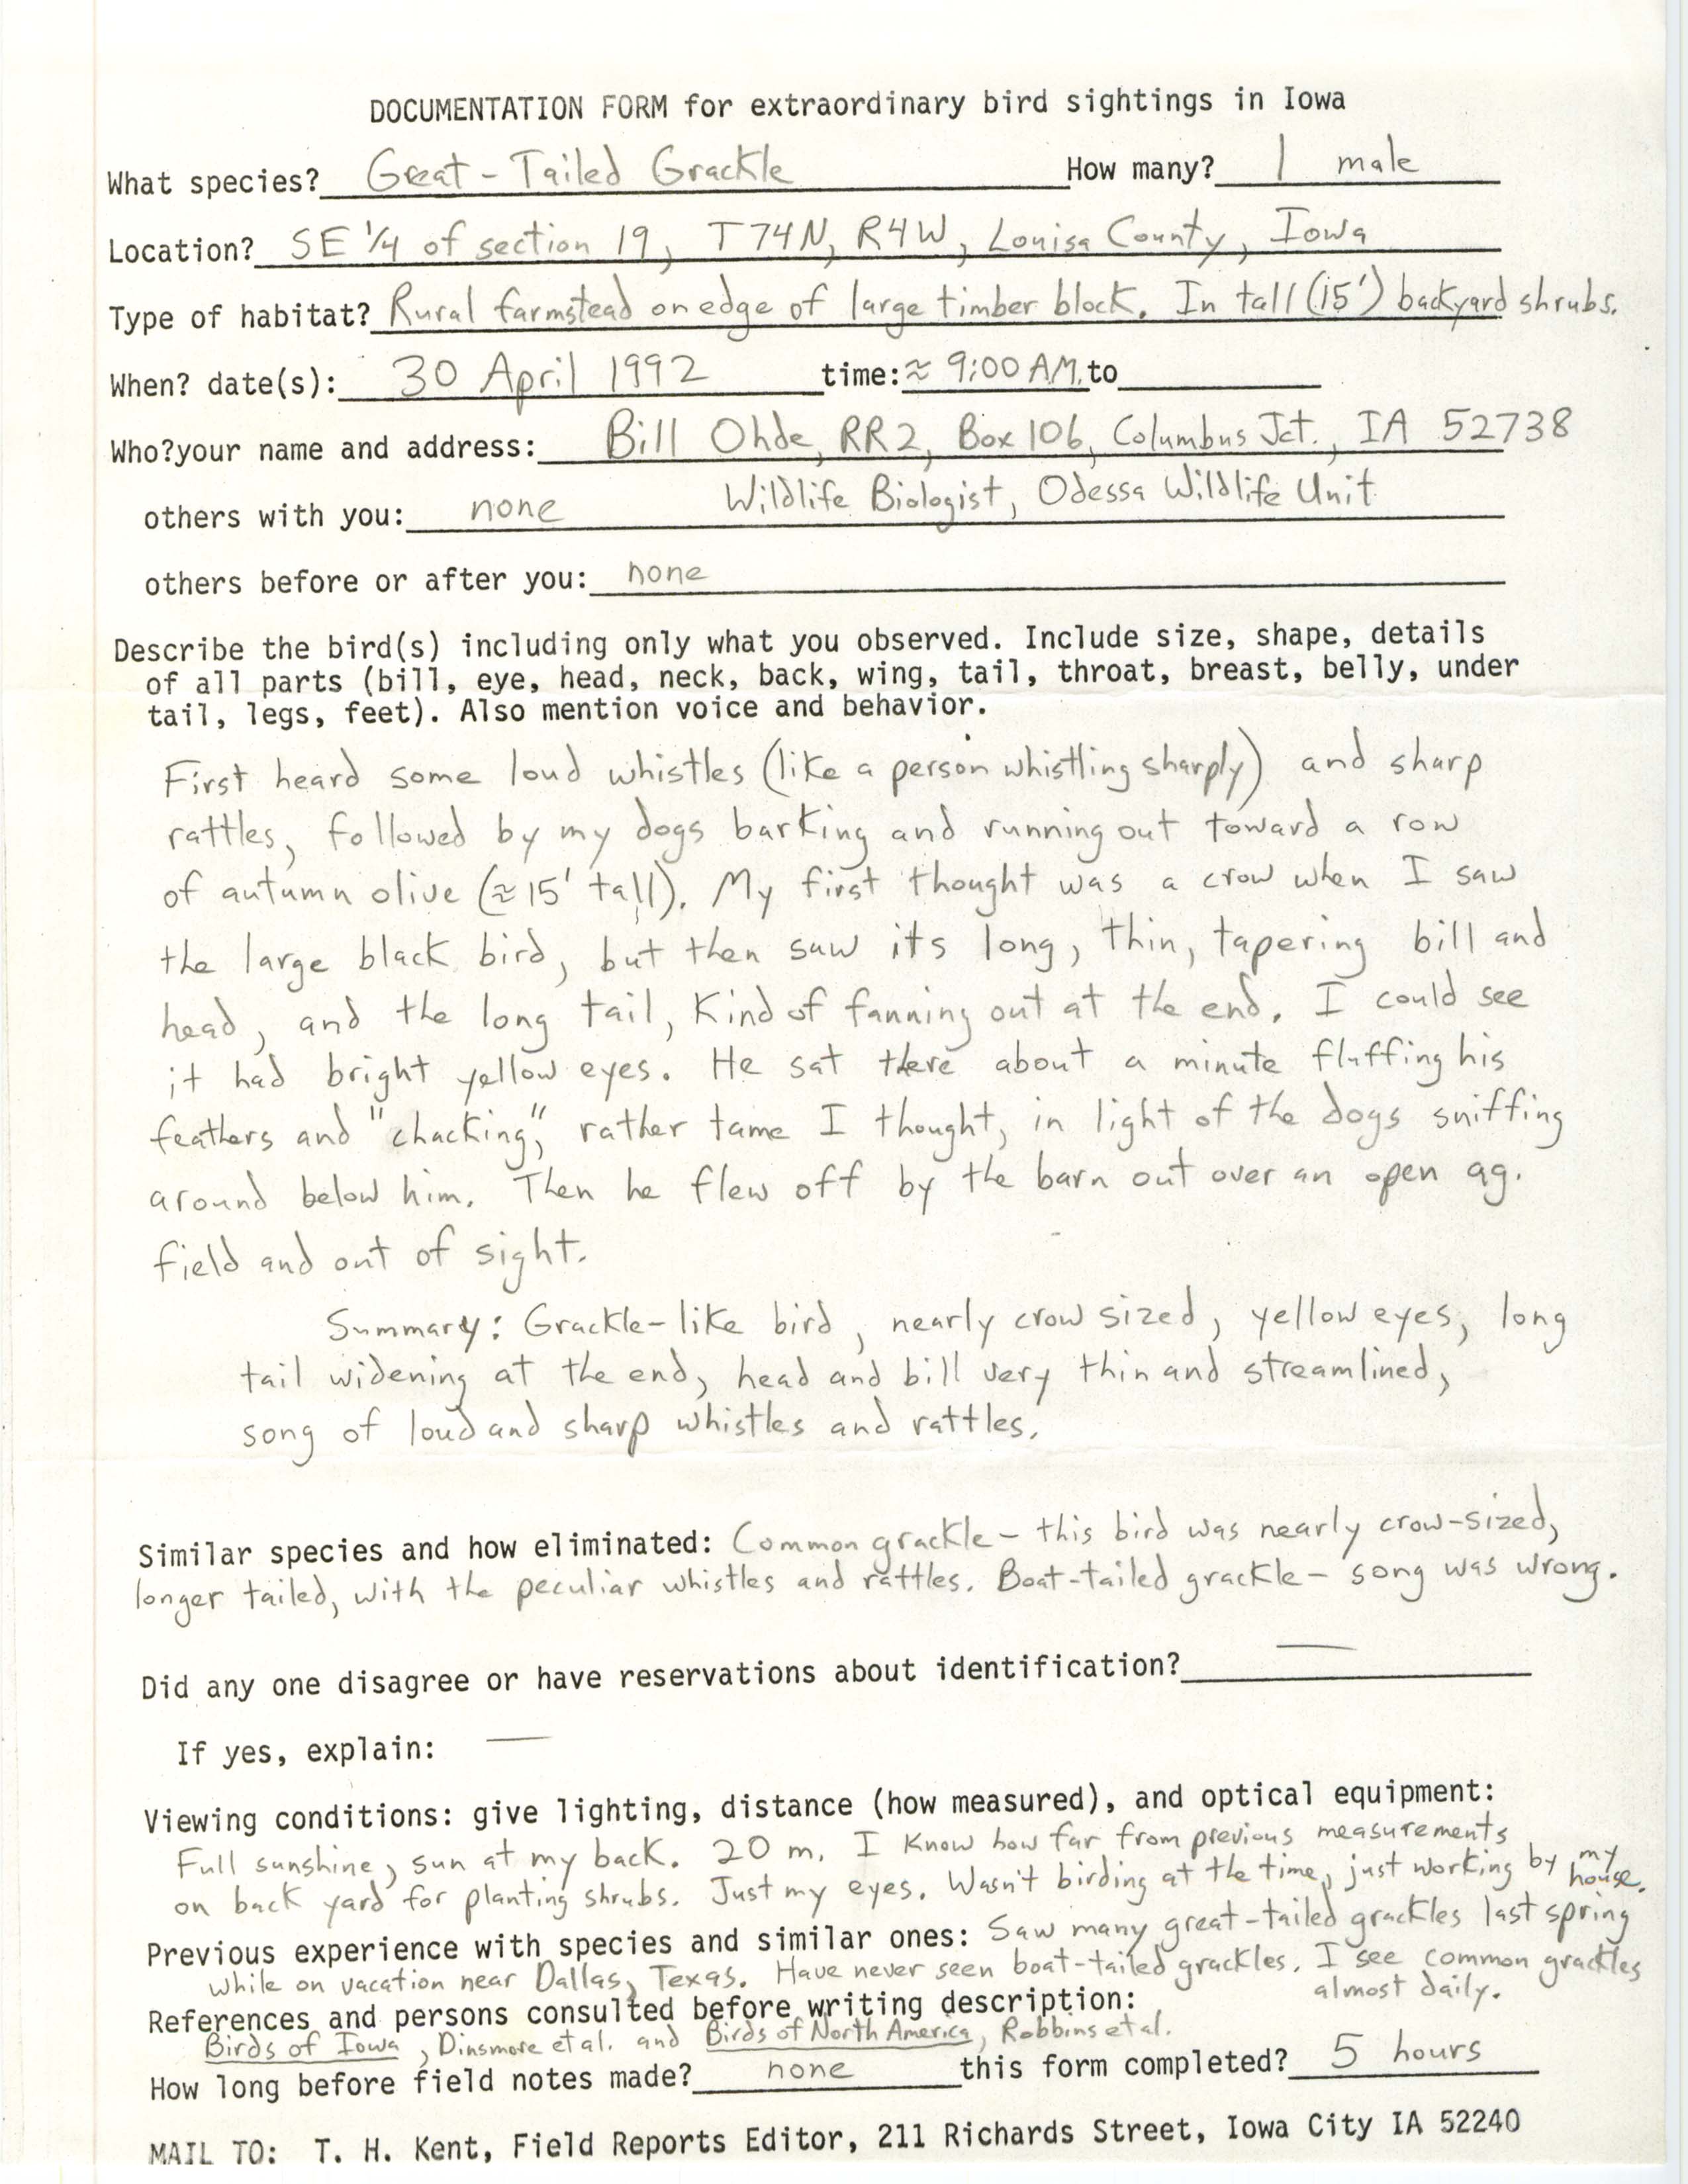 Rare bird documentation form for Great-tailed Grackle at Wapello Township in Louisa County, 1992